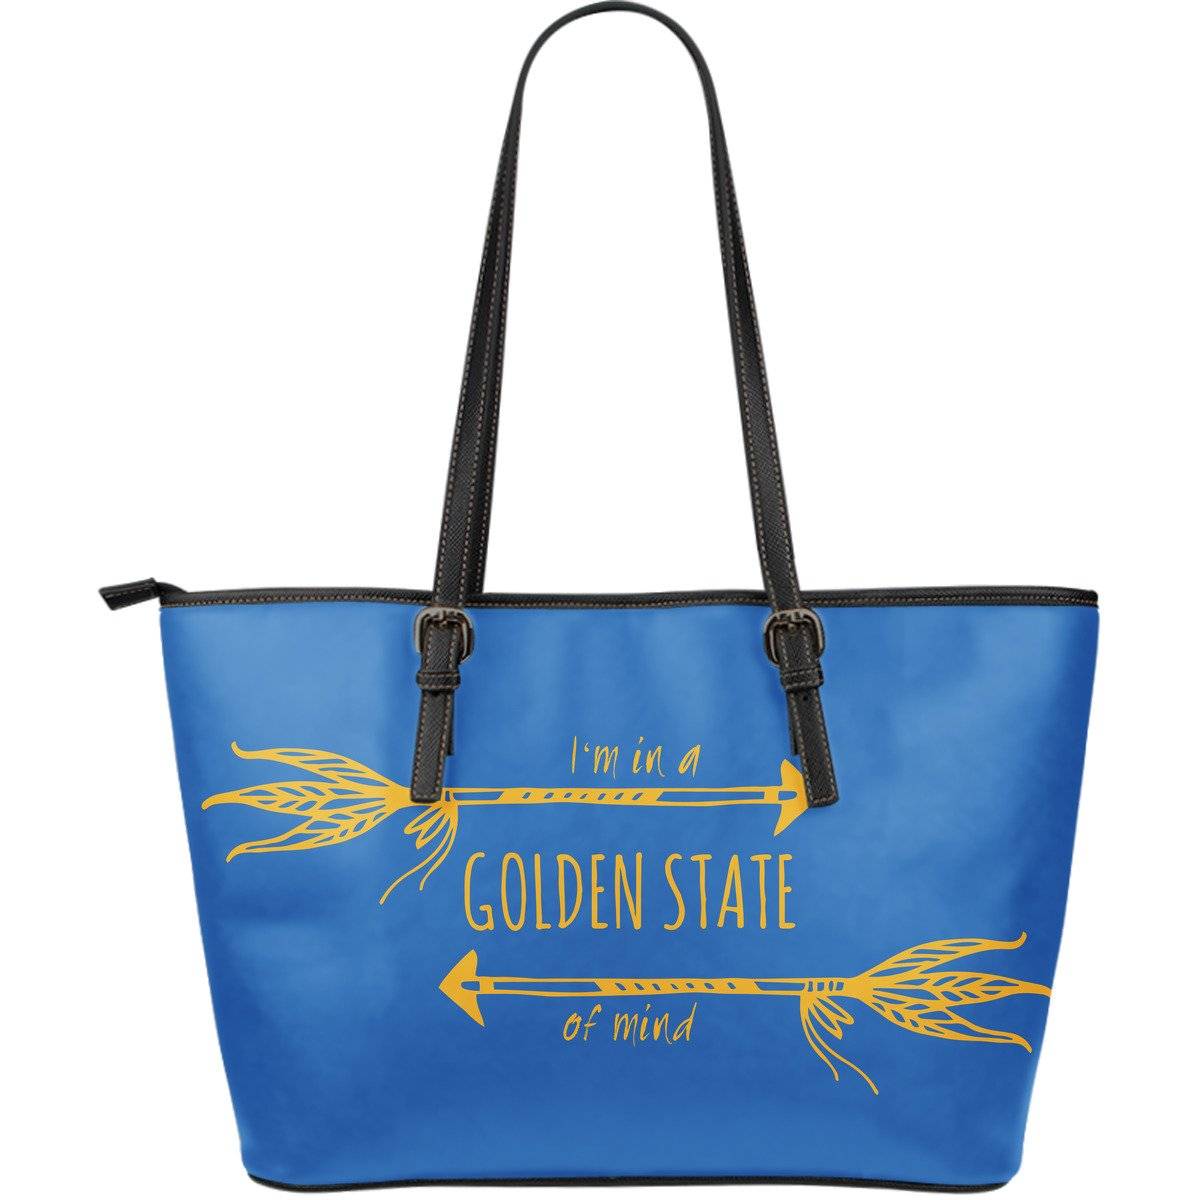 Golden State of Mind Vegan Leather Tote